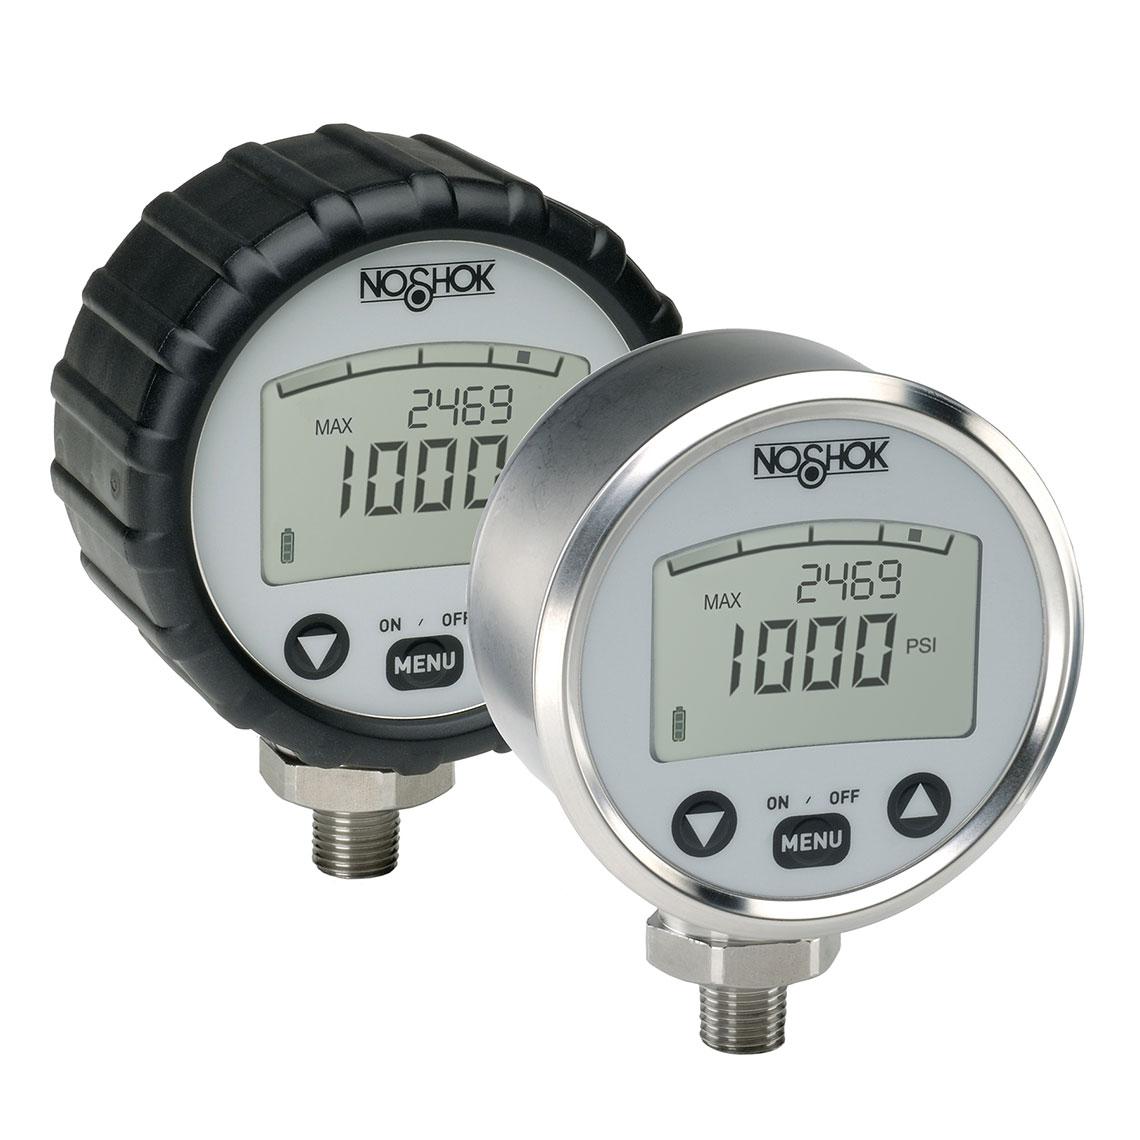 Noshok 1000-5000-2-6 0 to 5,000 psig, 1/4'' National Pipe Thread (NPT) Male Connection, Digital Pressure Gauge with Enhanced Software